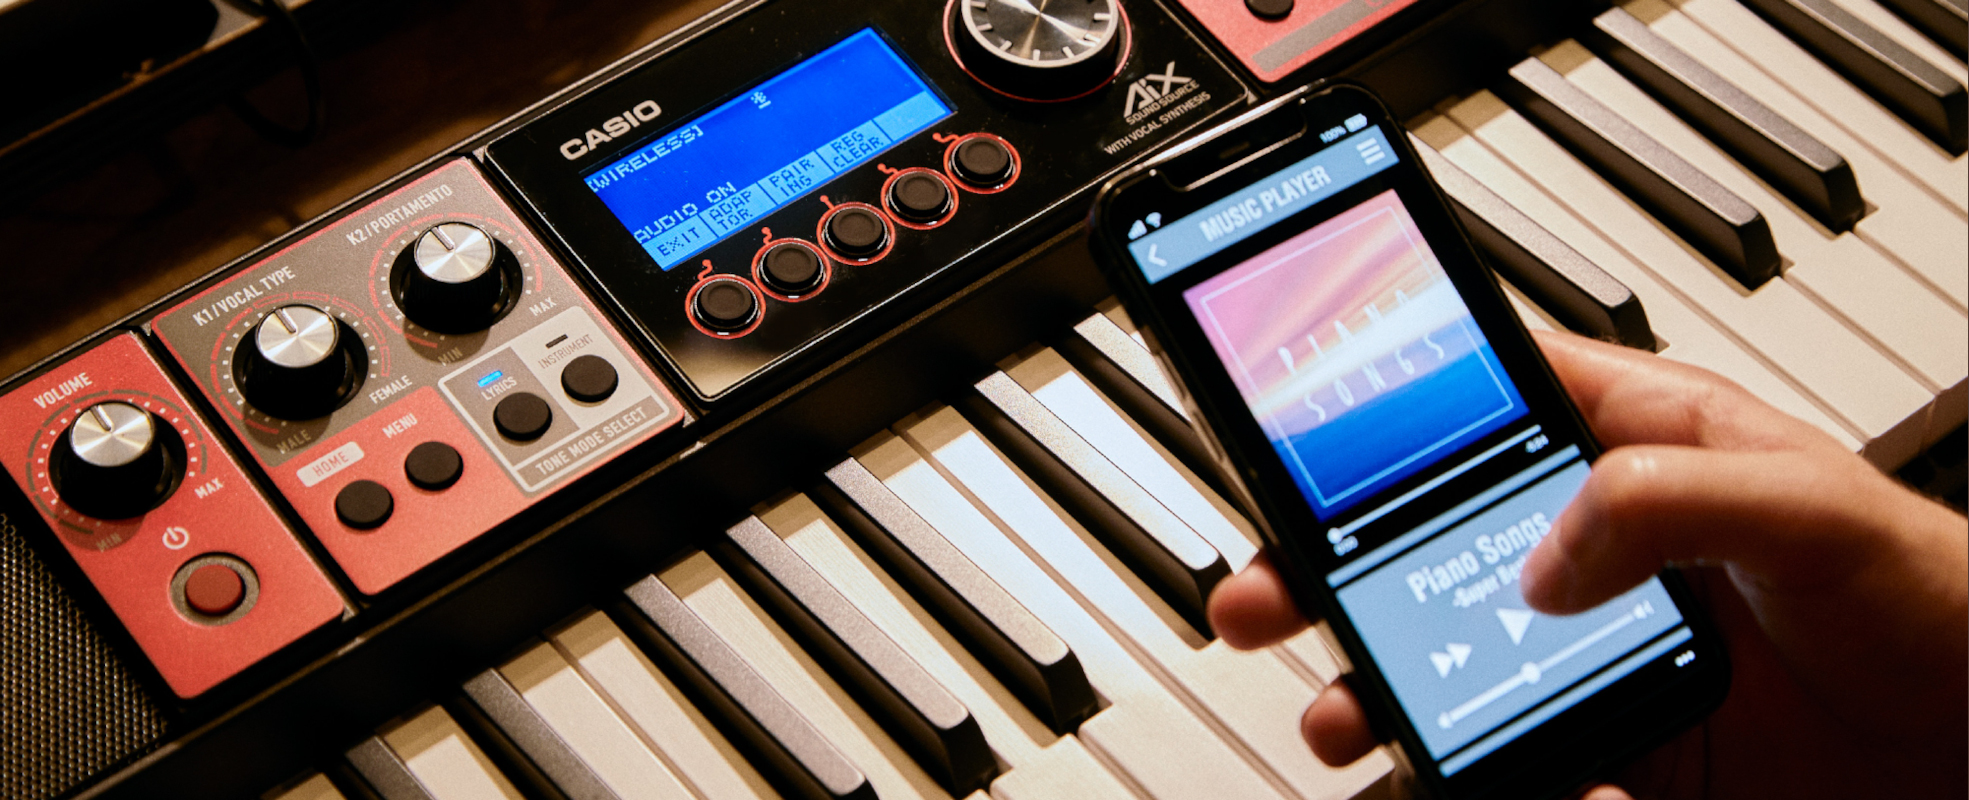 Gear Review: Casio’s New Casiotone CT-S500 Keyboard￼